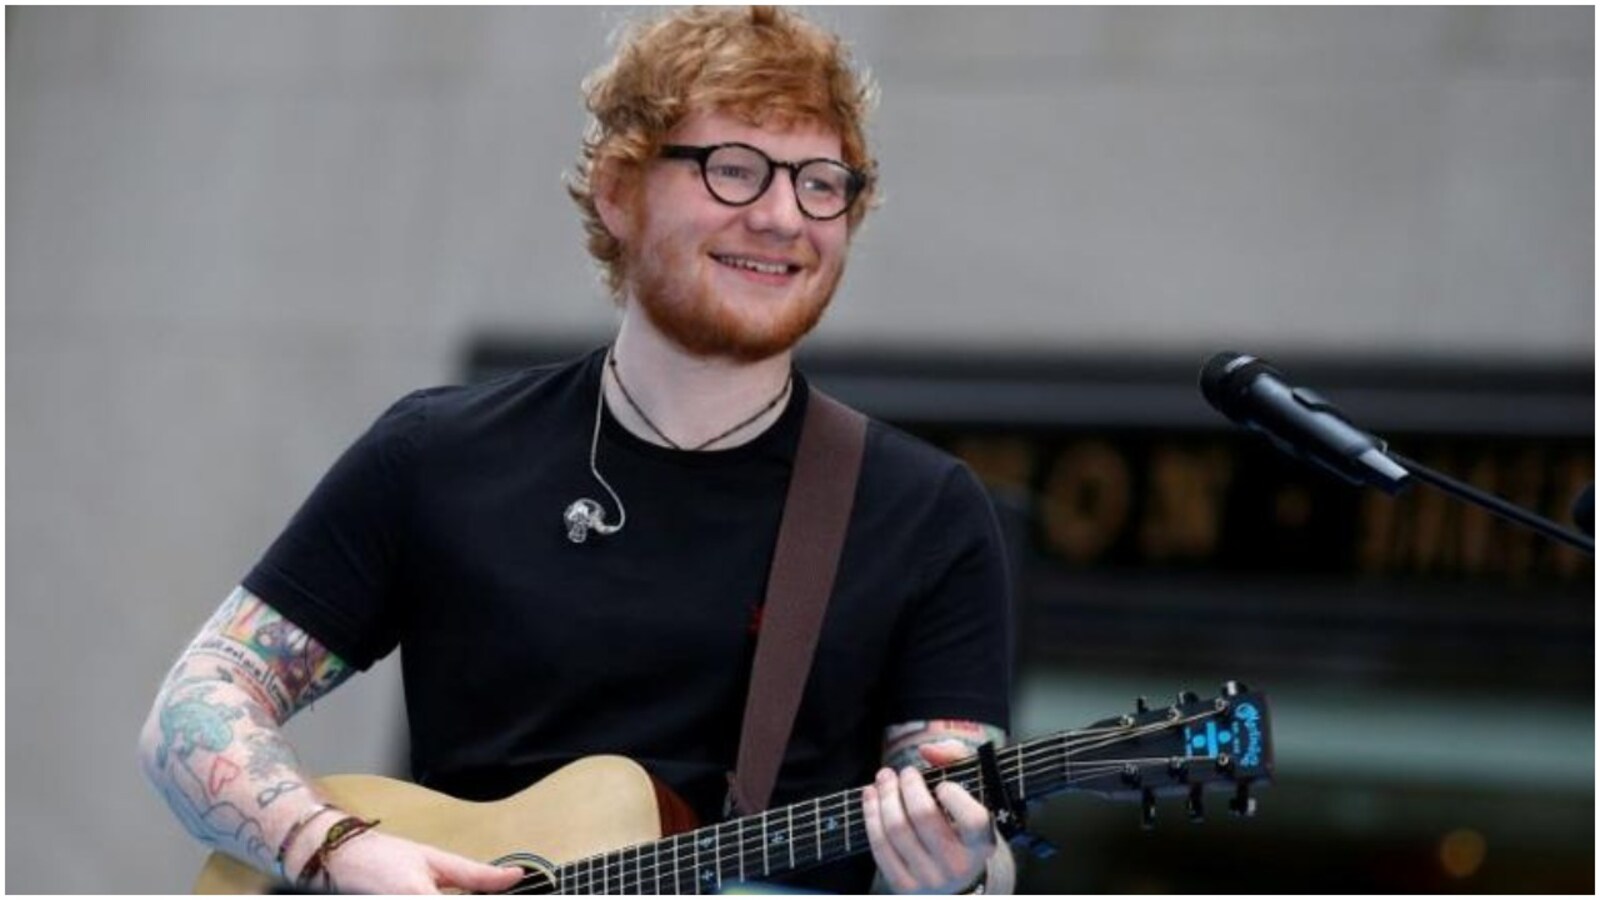 Ed Sheeran case: What it tells us about pop's musical toolbox